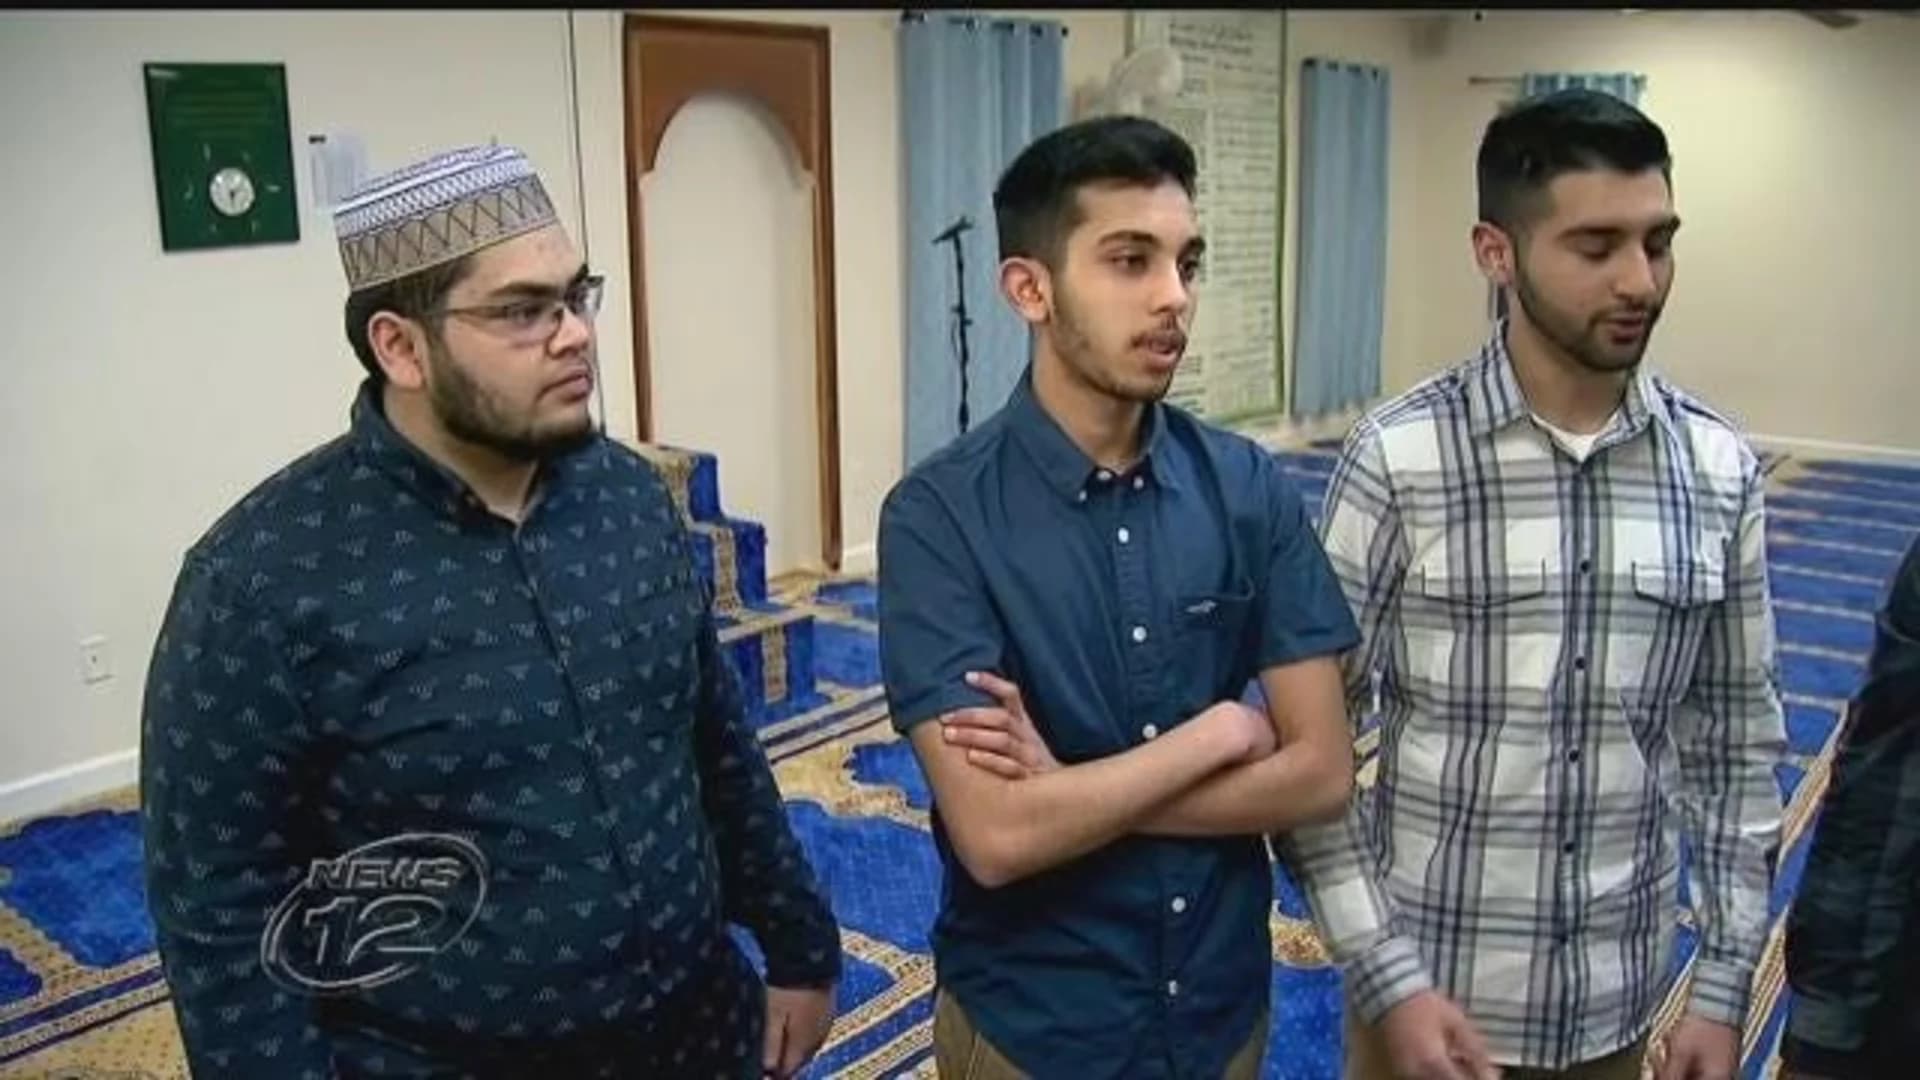 Students push for school to recognize Muslim holiday of Eid